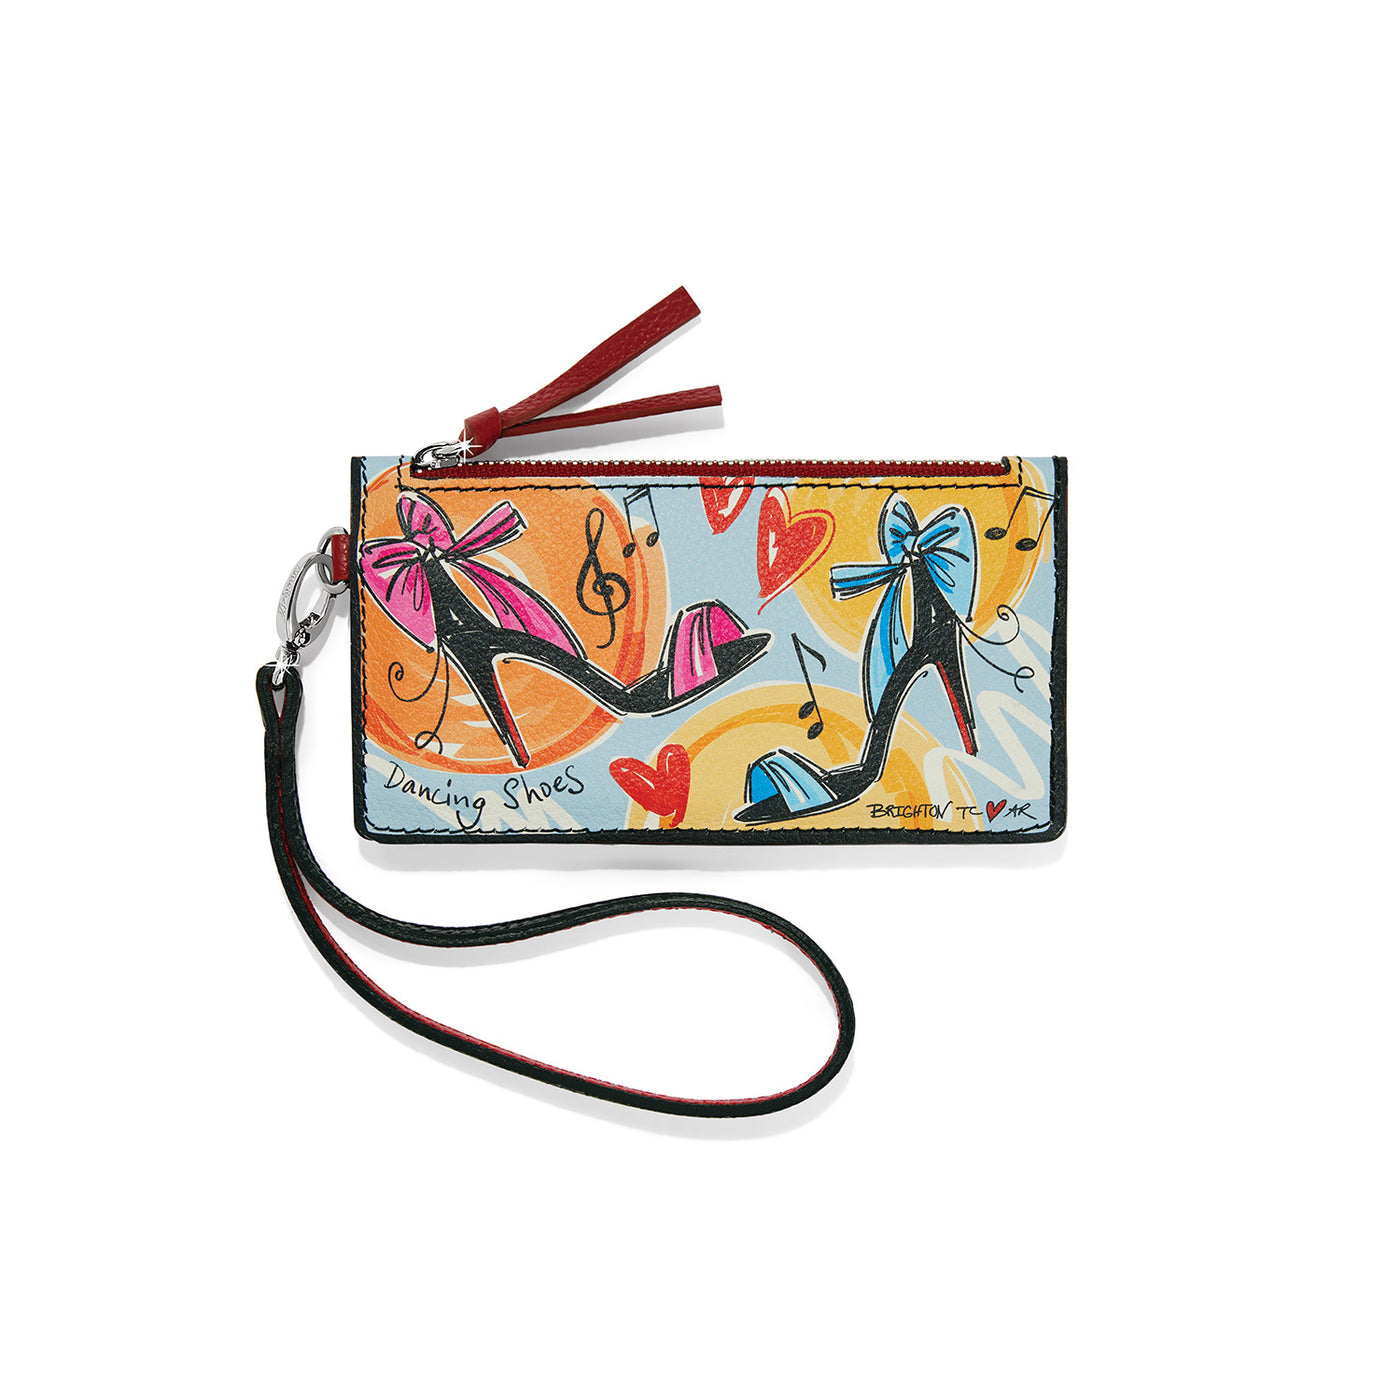 FASHIONISTA COVER GIRL POUCH